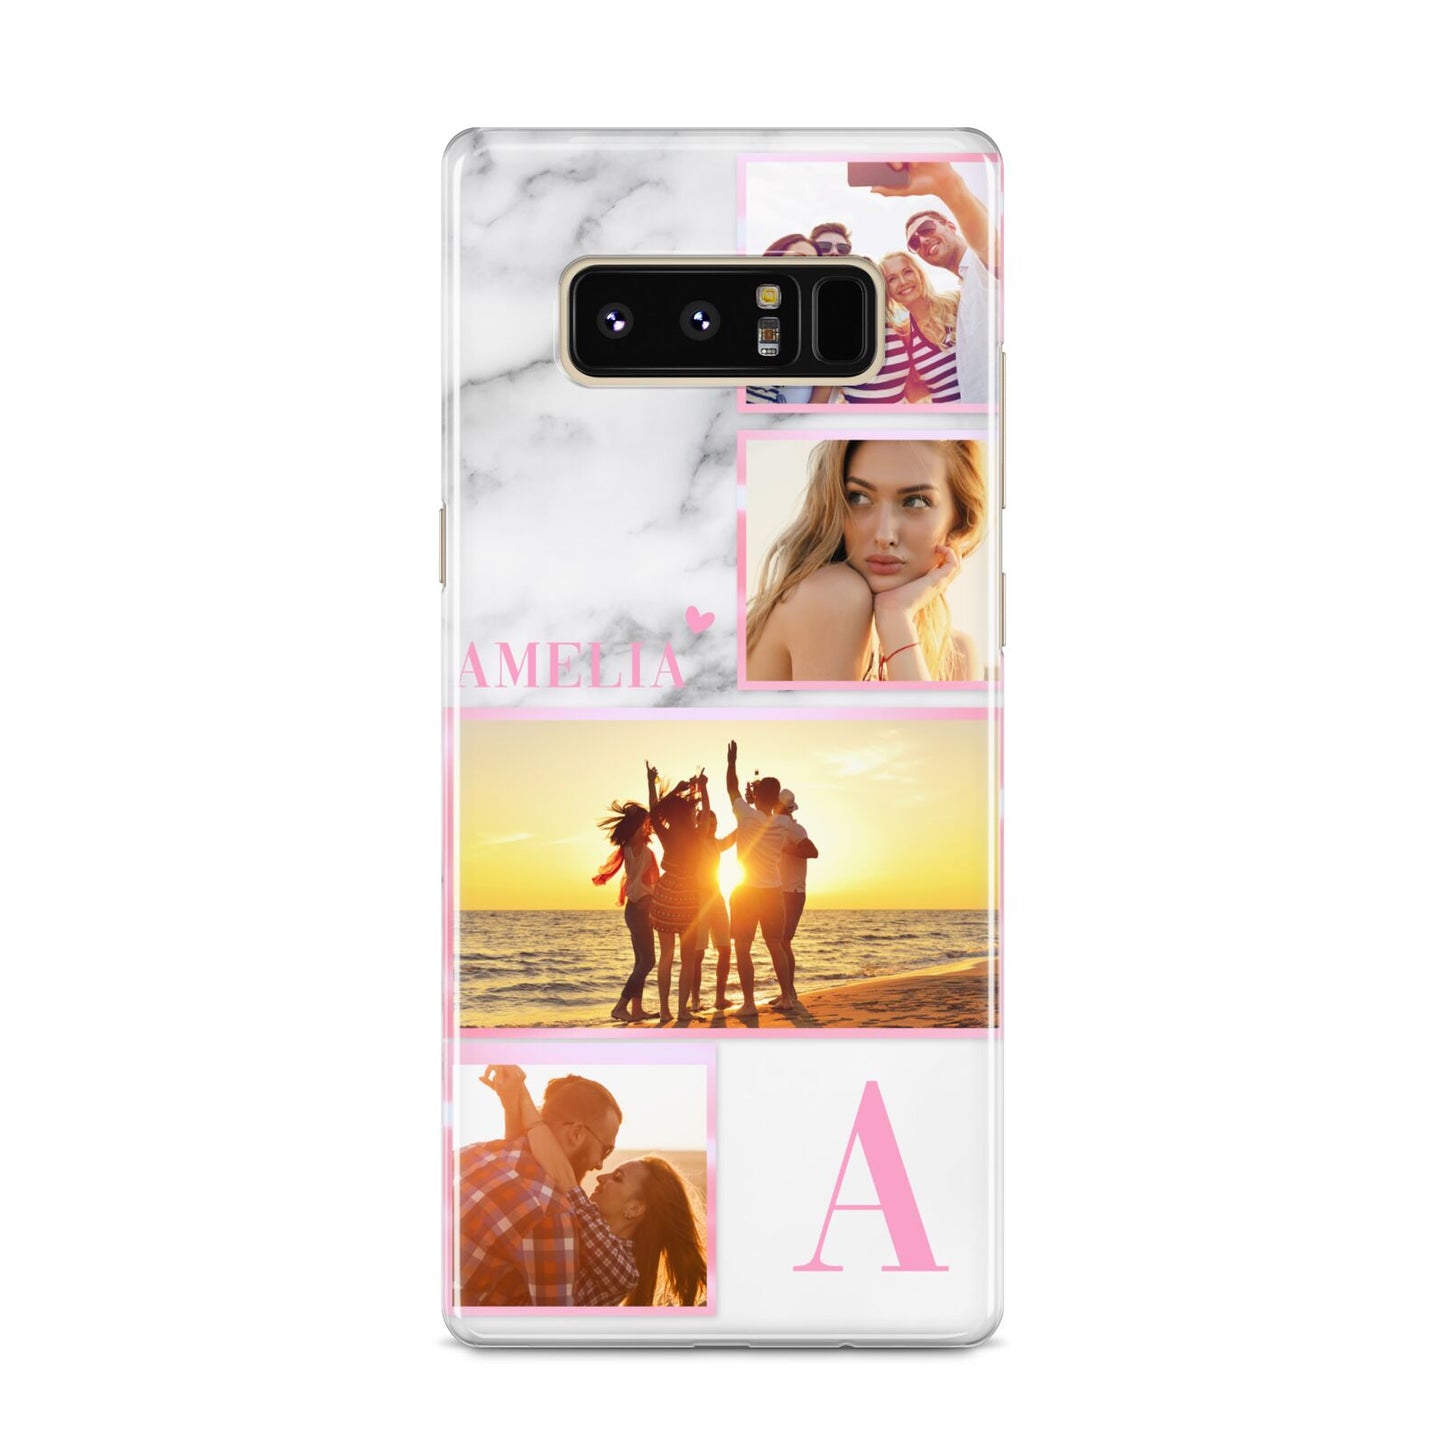 Personalised Marble Photo Collage Samsung Galaxy S8 Case